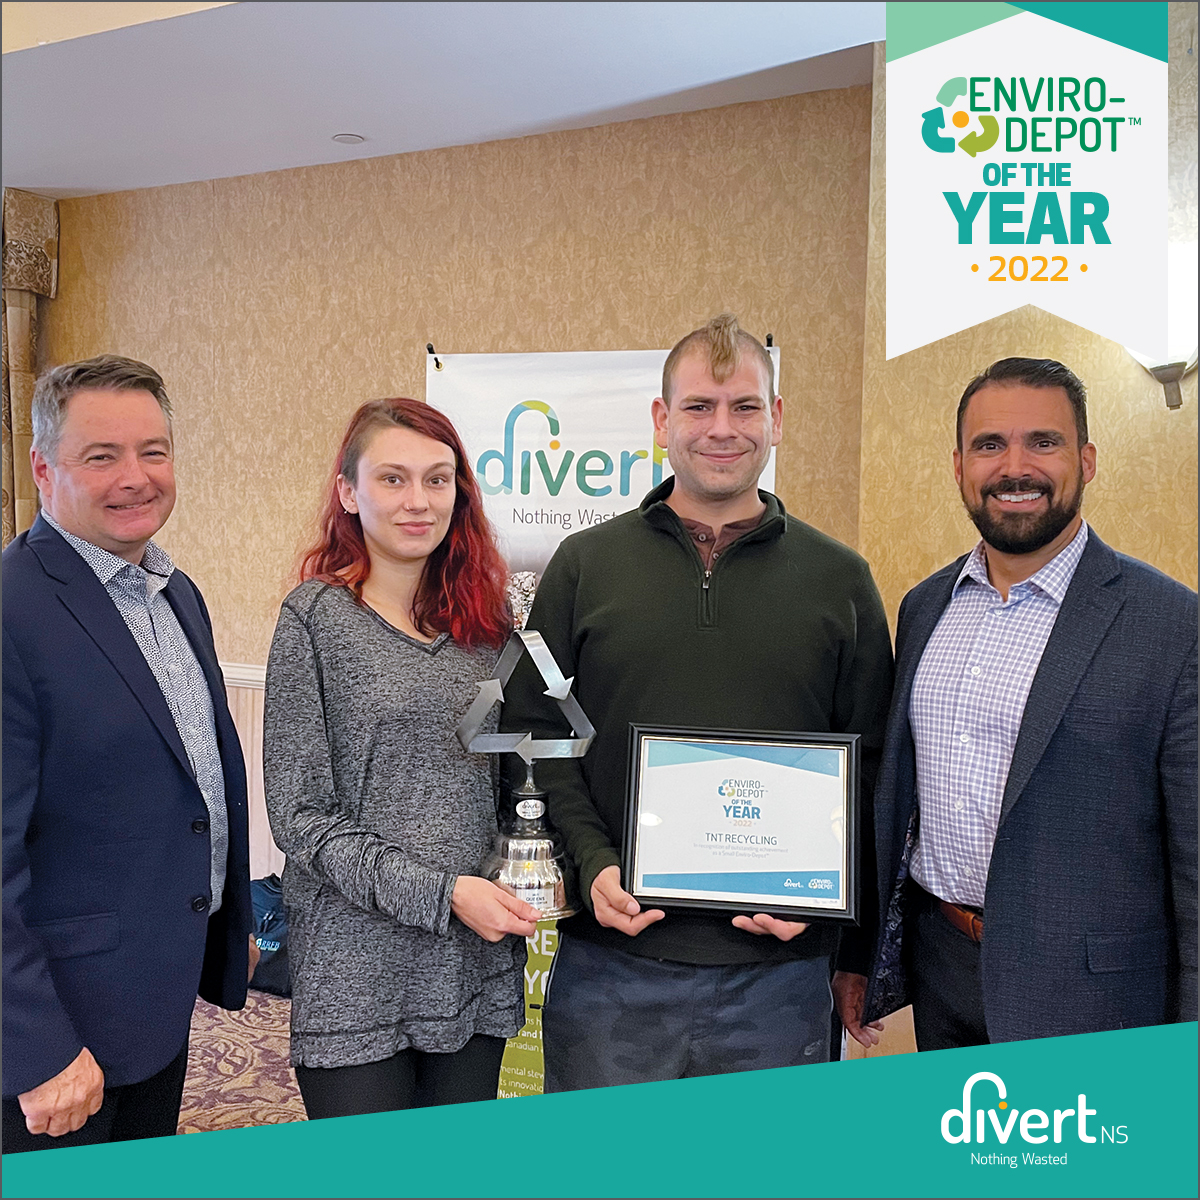 Divert NS is proud to celebrate this year’s 2022 Small Depot of the Year Award winner, TNT Recycling! Thank you for going the extra mile to make recycling a positive experience for everyone.